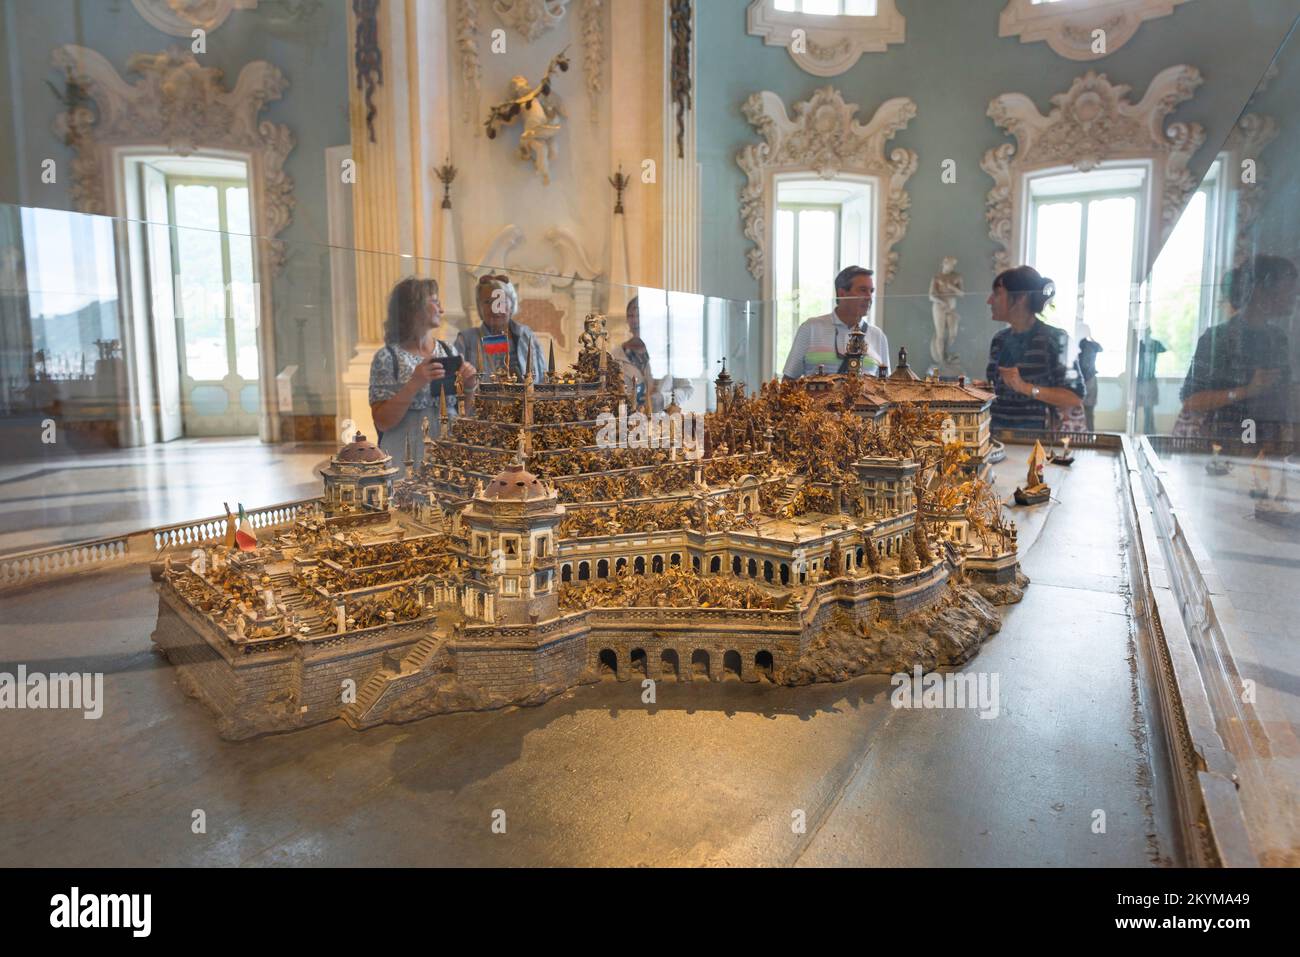 Palazzo Borromeo, view of people looking at a detailed model of Isola Bella inside the Salone Nuovo in the Palazzo Borromeo, Piedmont, Italy Stock Photo